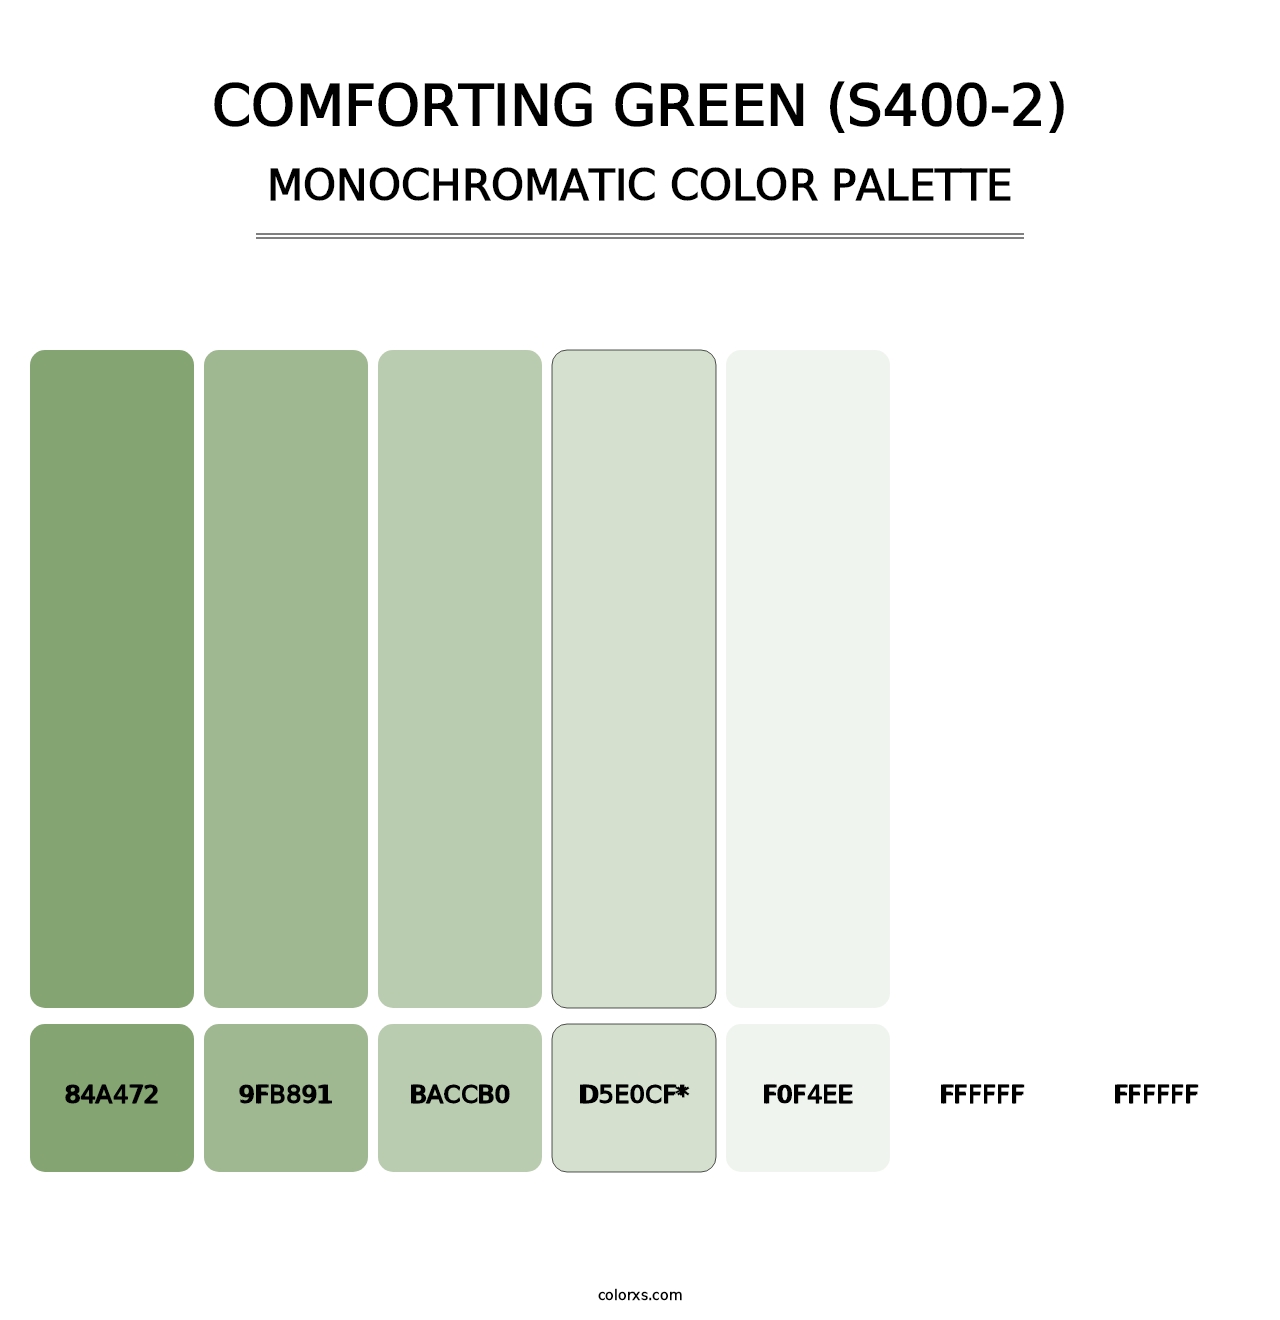 Comforting Green (S400-2) - Monochromatic Color Palette